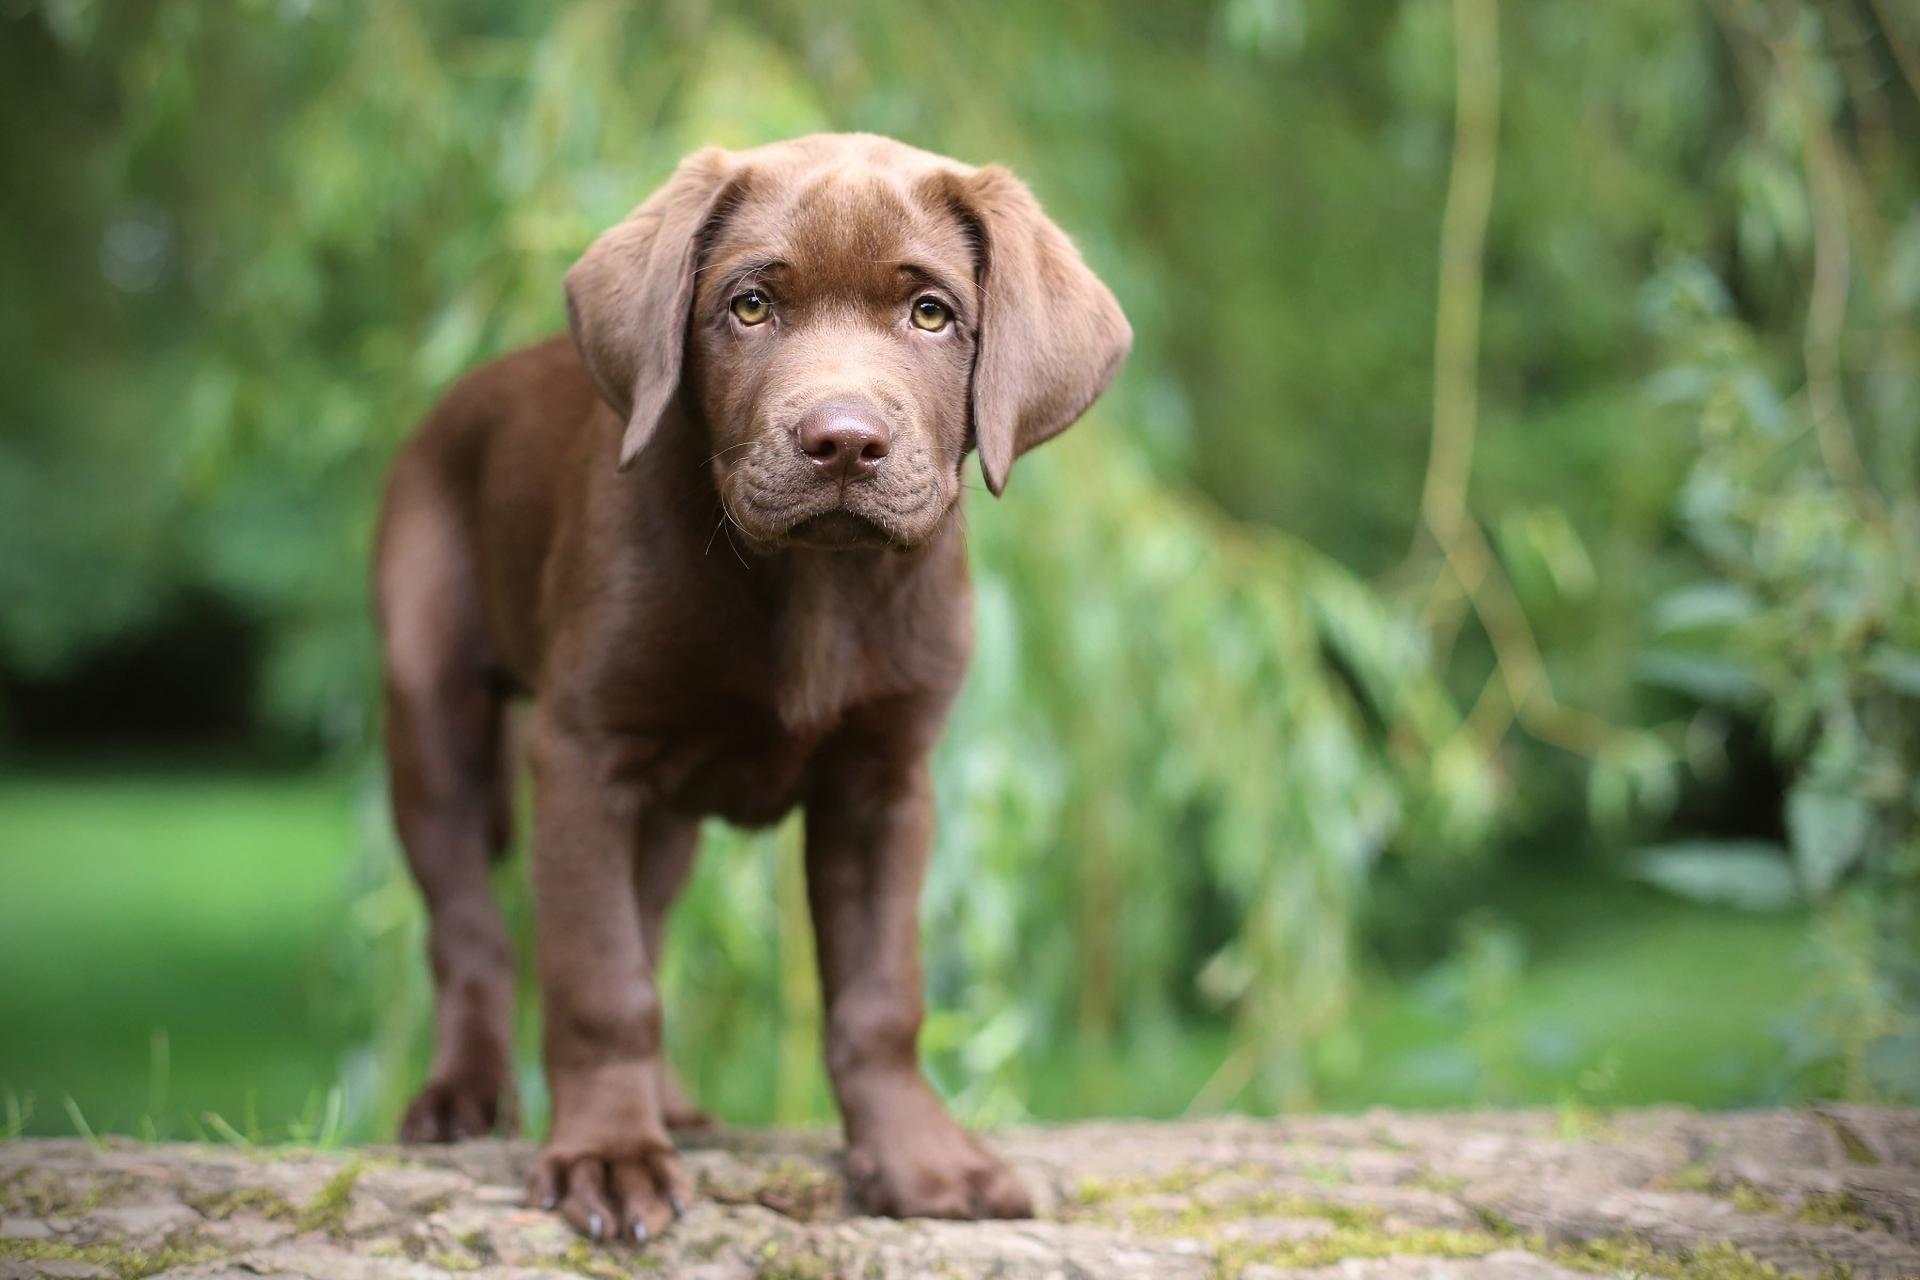 Chocolate Lab Puppy Wallpaper Background Image. View